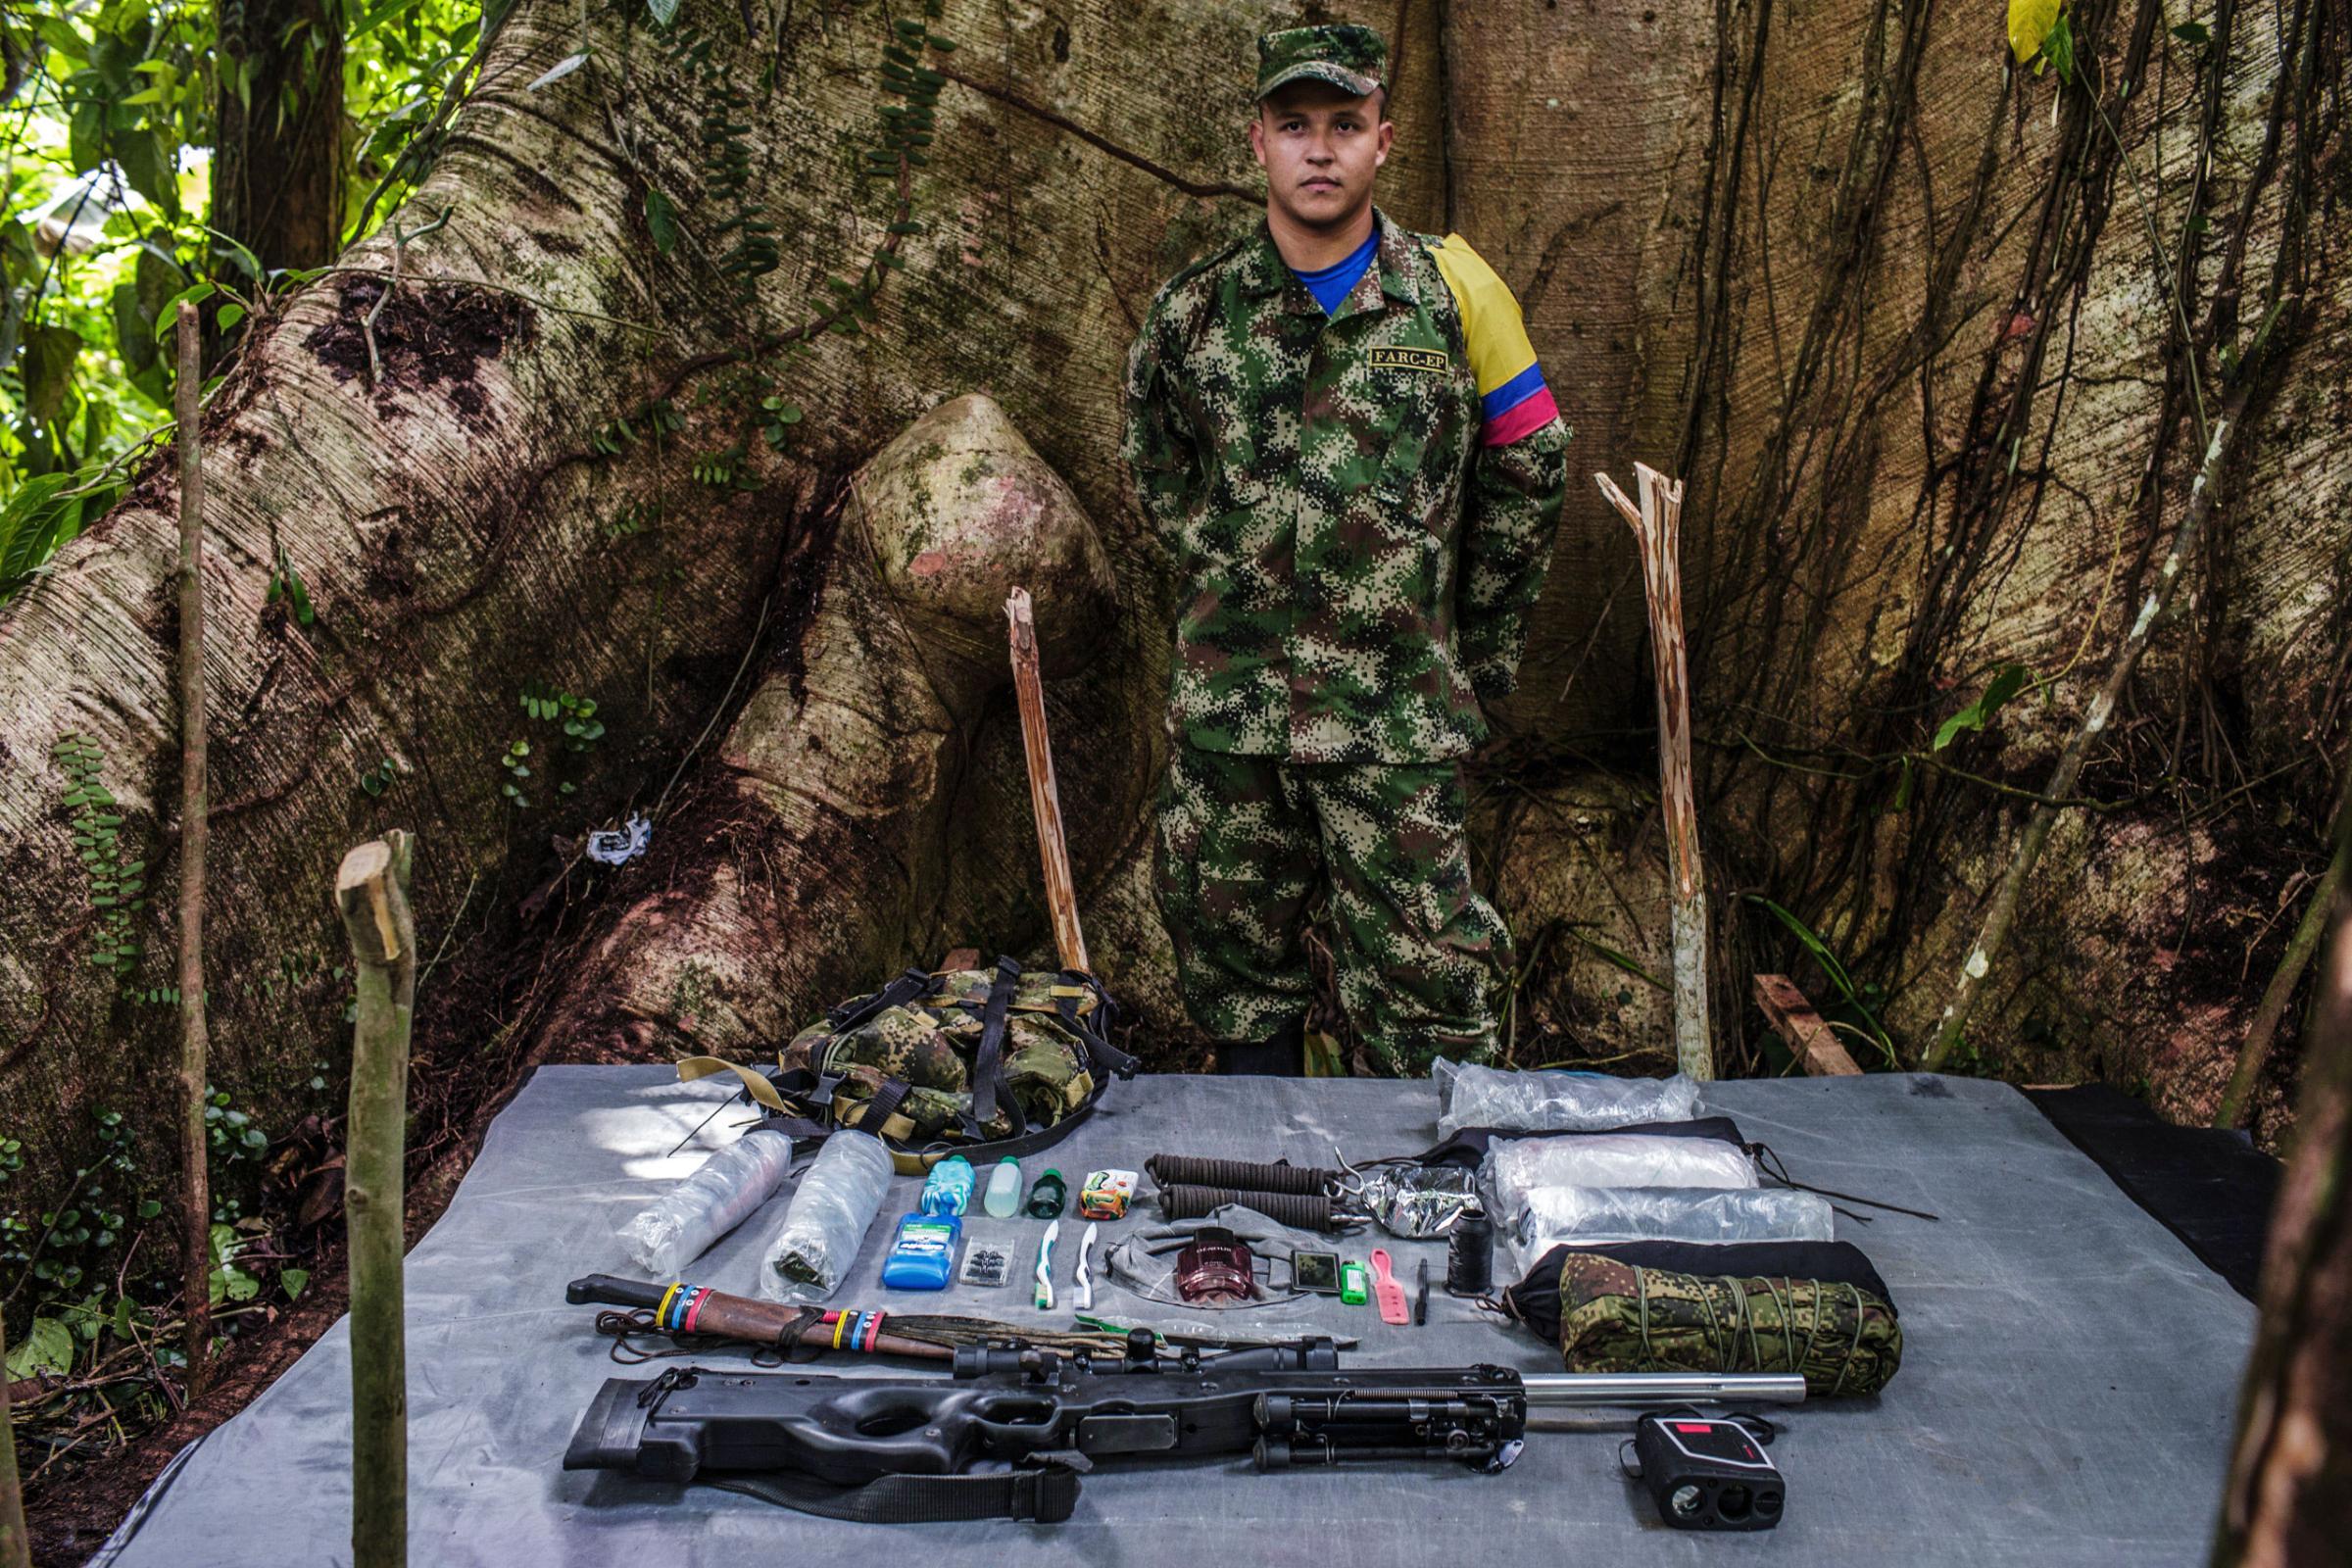 "Junior " is a 20-year old, who has been with FARC for seven years. He has attended several training courses to learn sniper fire and accuracy for special weapons. He uses tactical binoculars to calculate the distance between the target and the shooter. In order to move through the jungle swiftly, his luggage is lightweight.